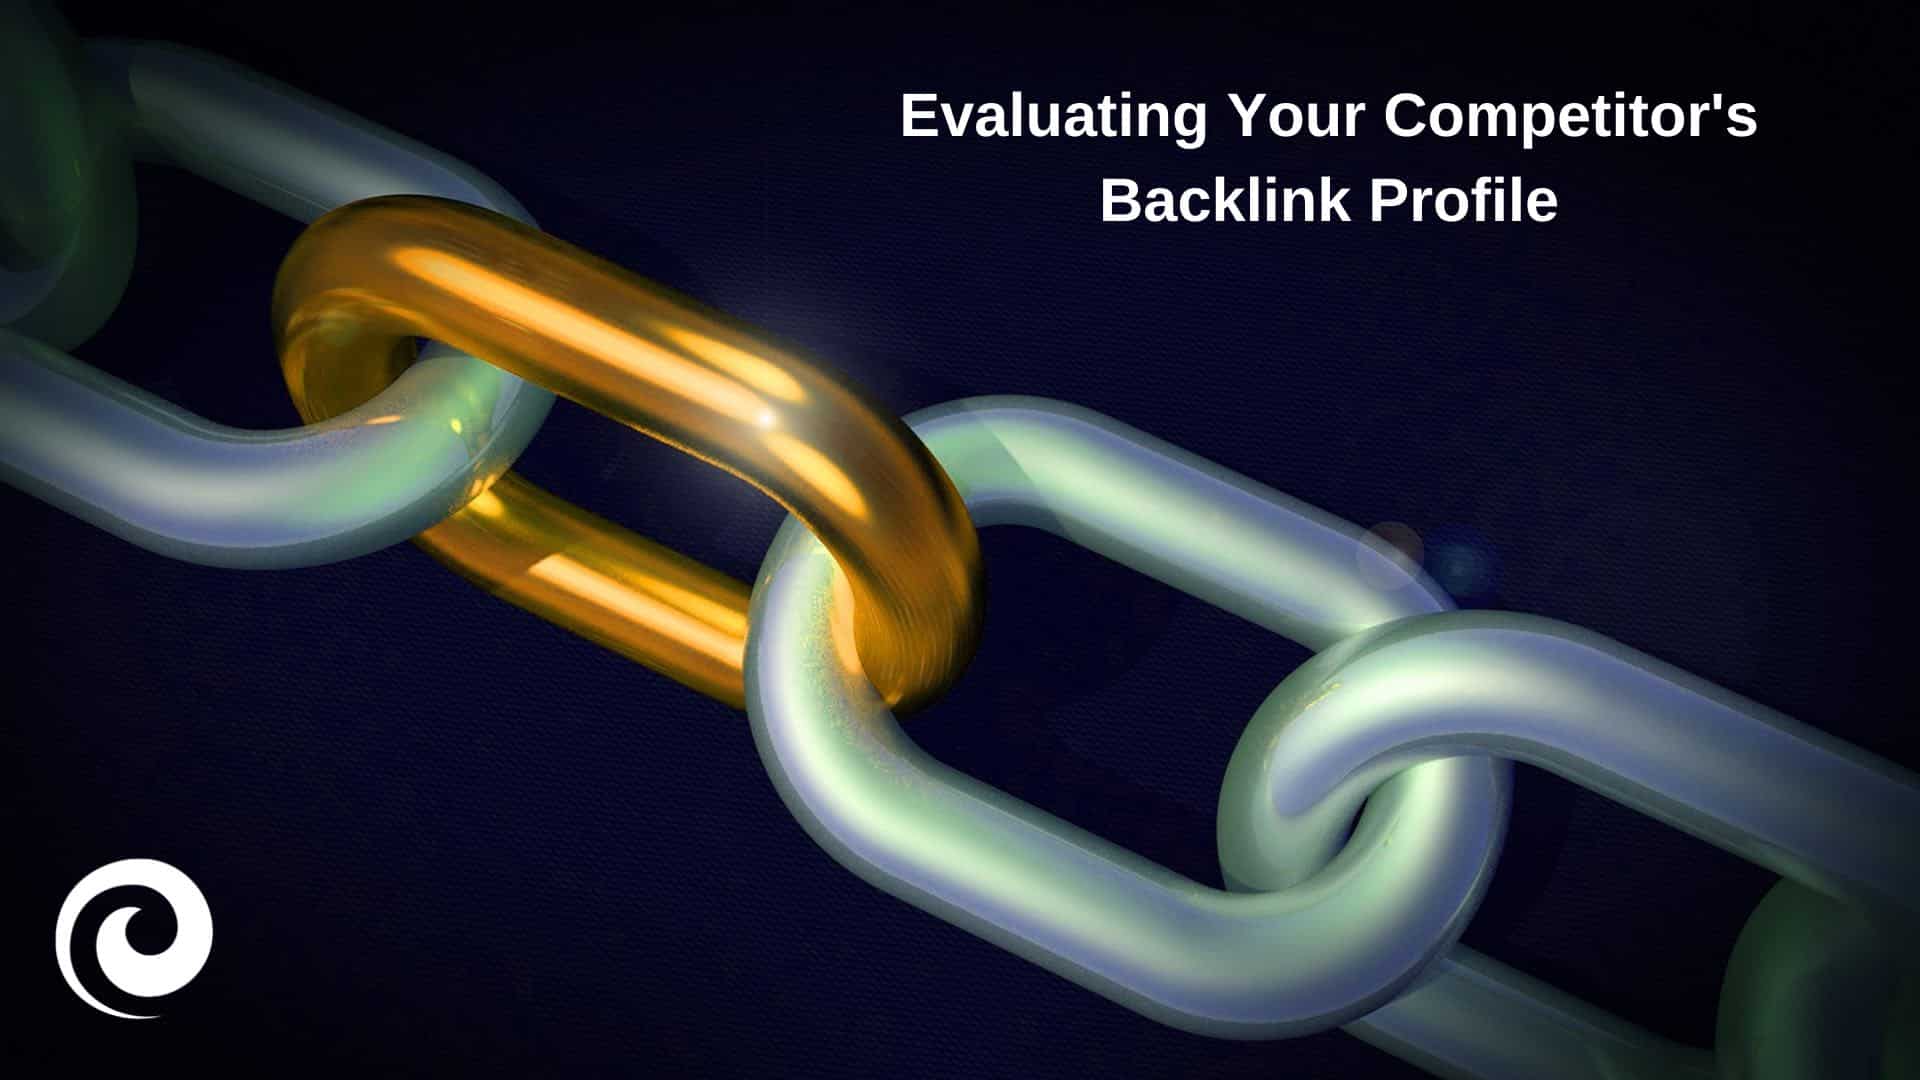 Everything you should know about evaluating your competitor's backlink profile